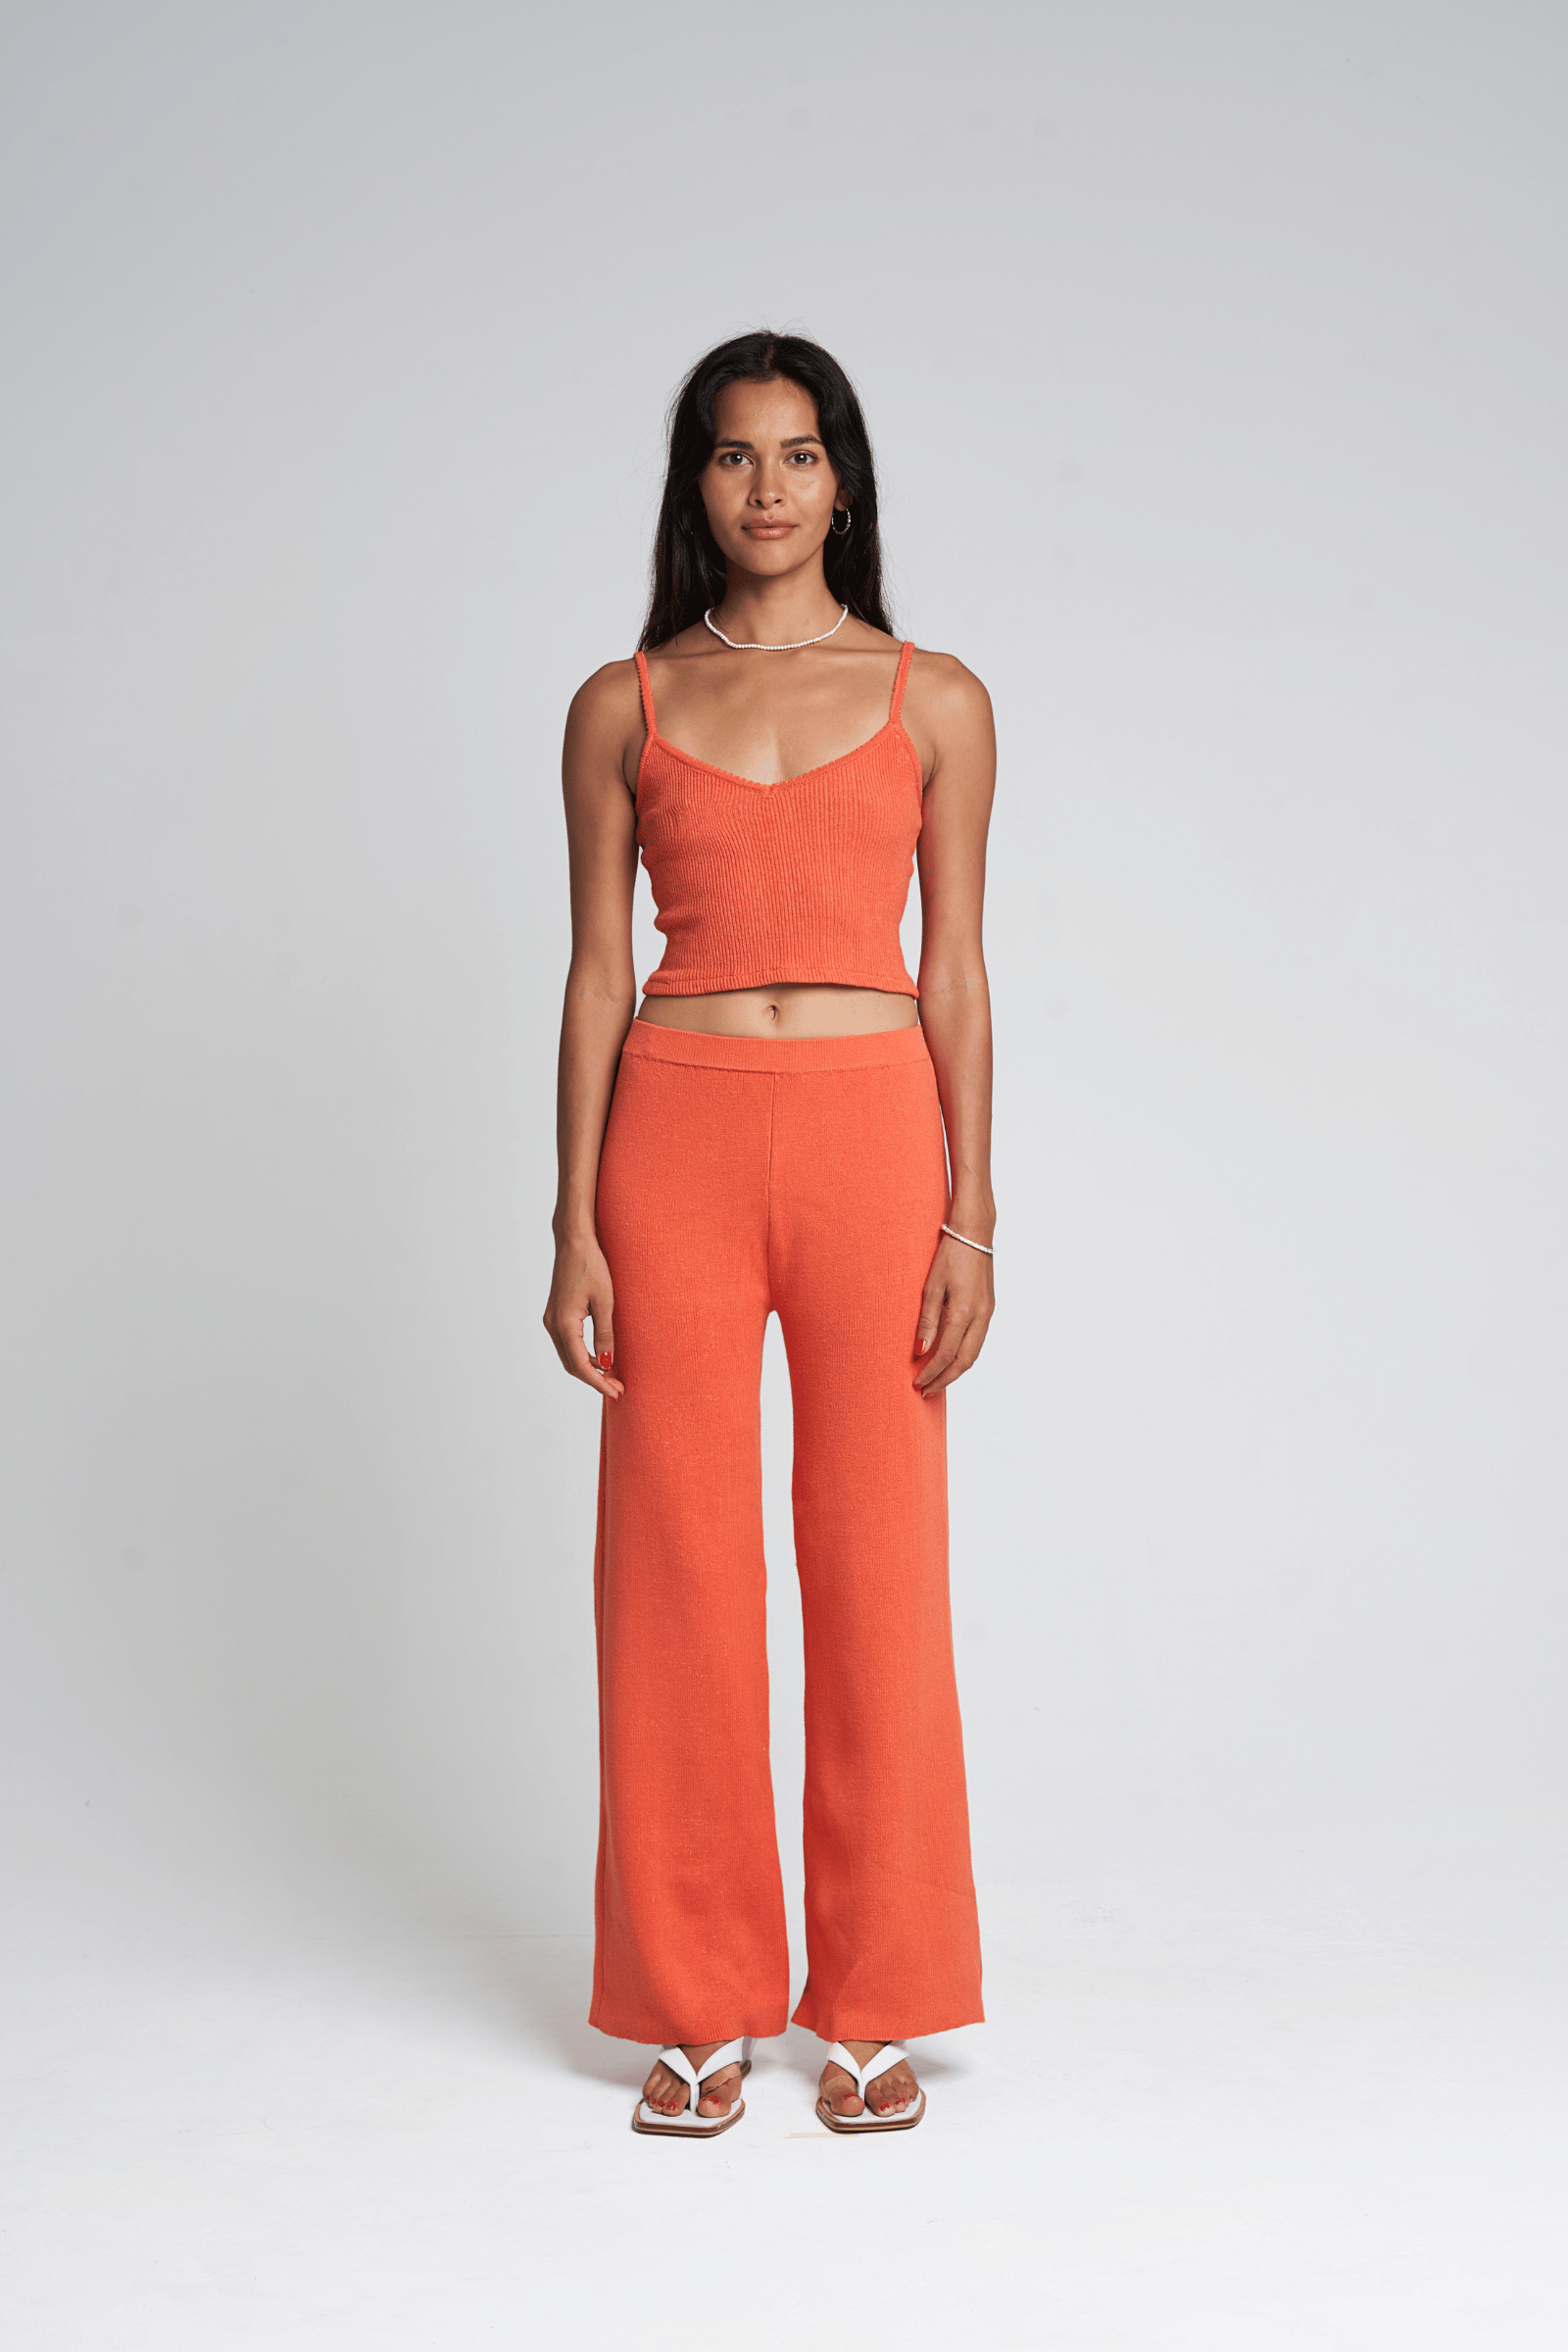 Wide Leg Crop Pants in coral red